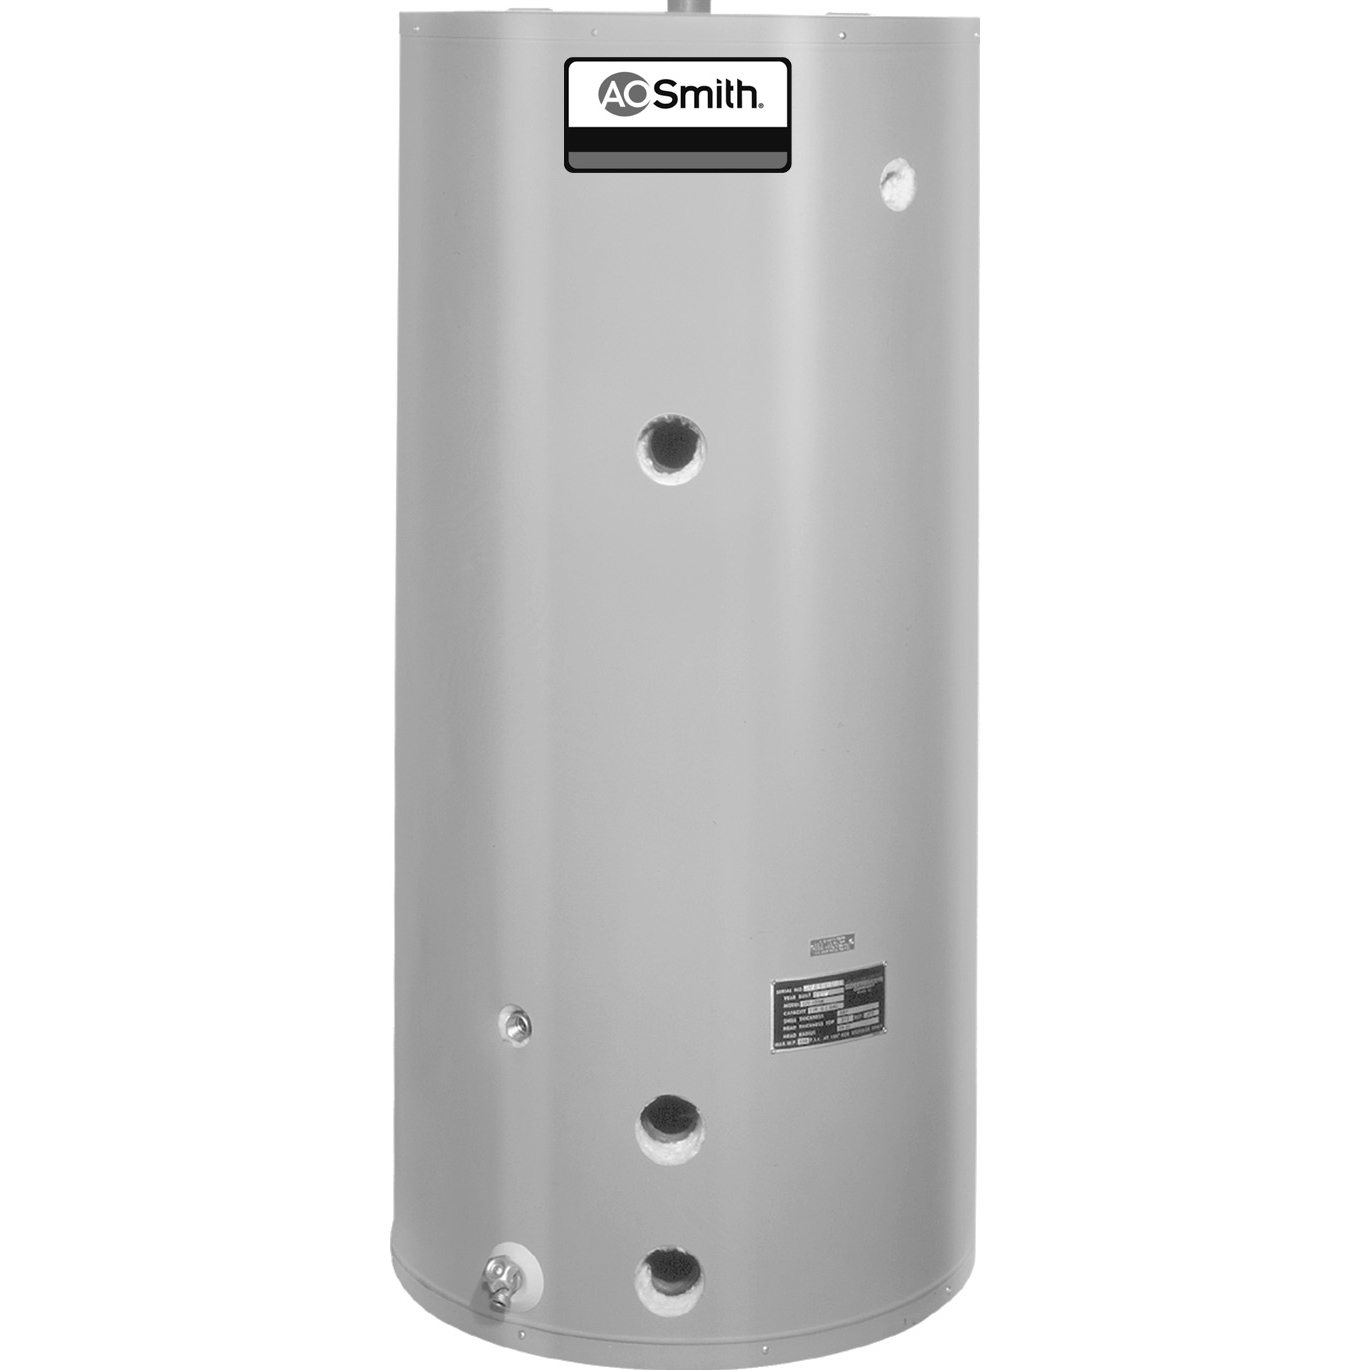 TJV-120A STORAGE TANK VERTICAL INSULATED JACKETED ASME